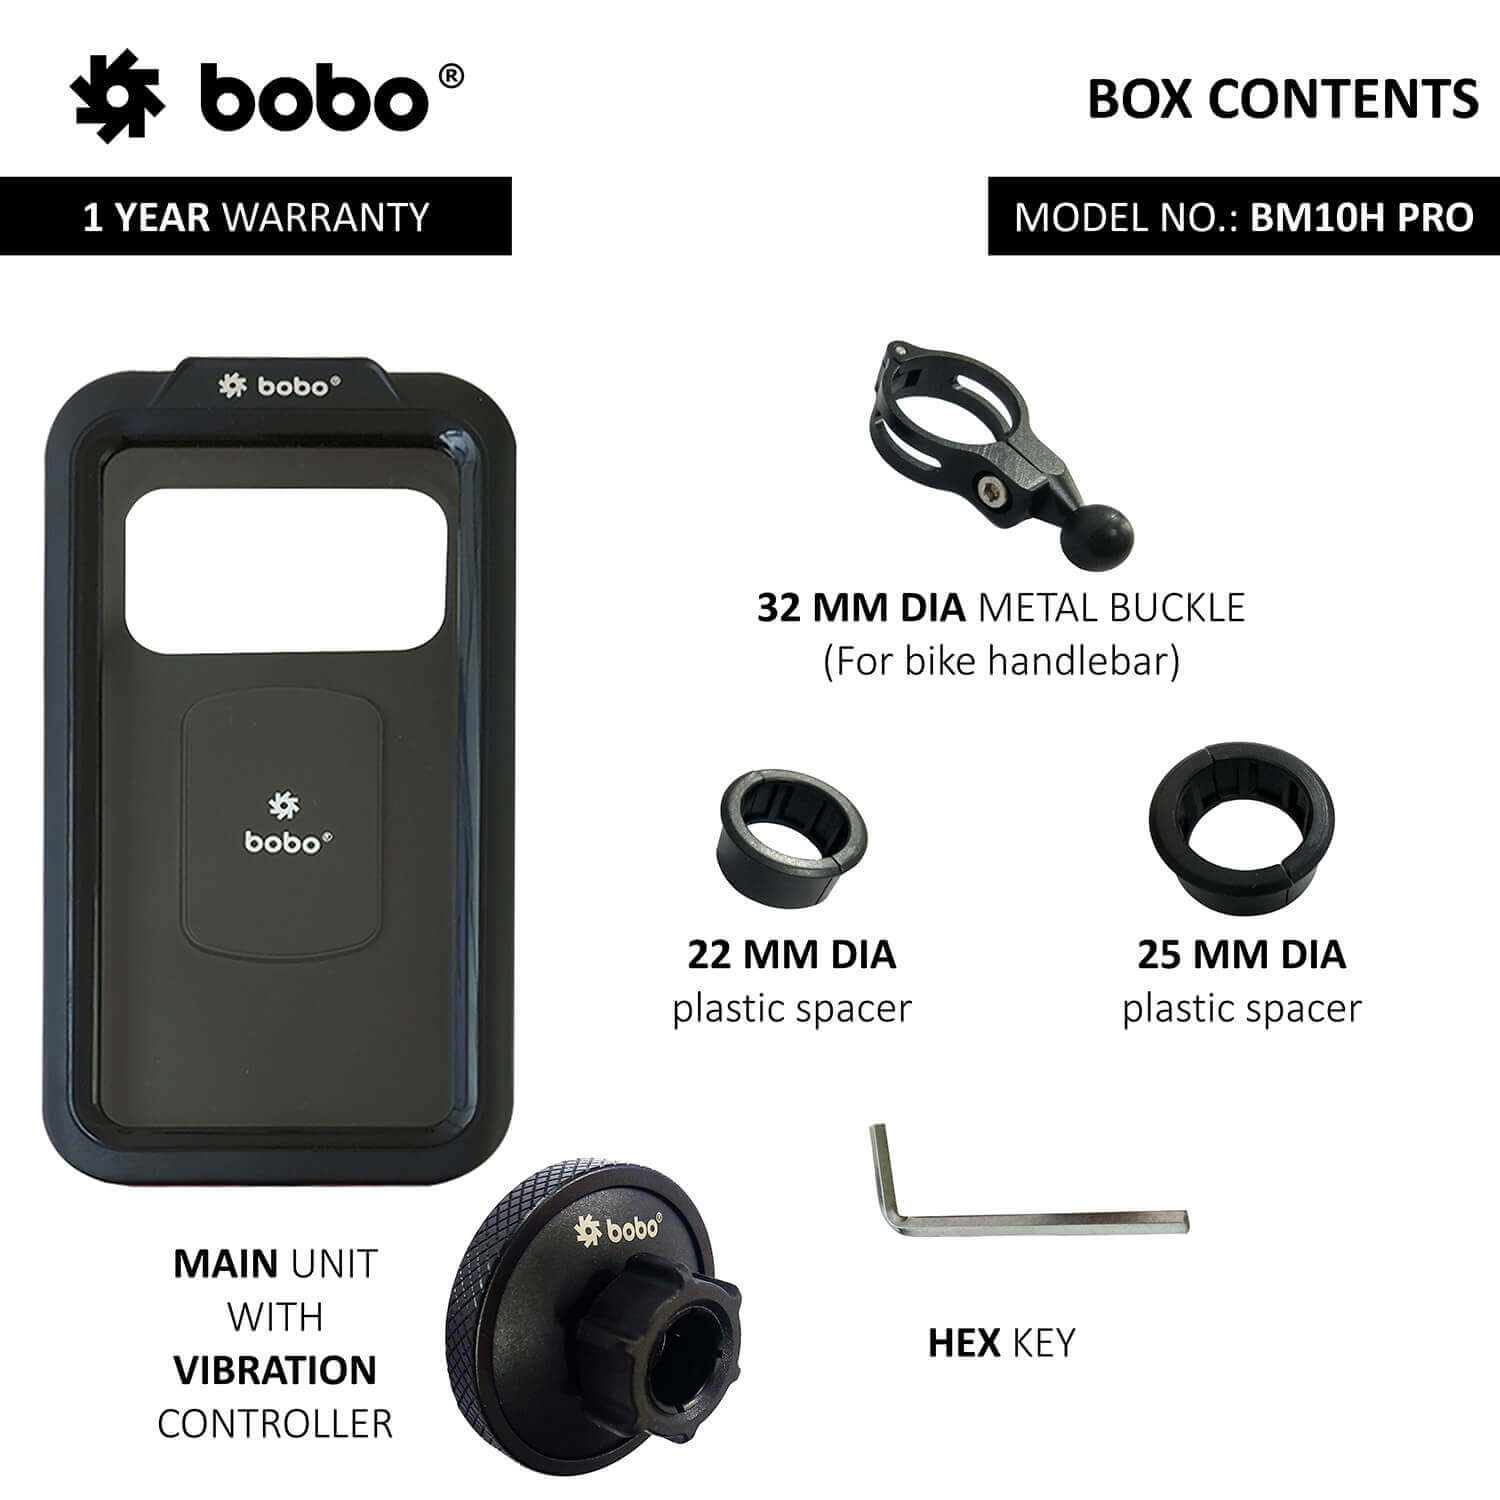 BOBO BM10H PRO Fully Waterproof Bike / Cycle Phone Holder with Vibration Controller Motorcycle Mobile Mount - LRL Motors